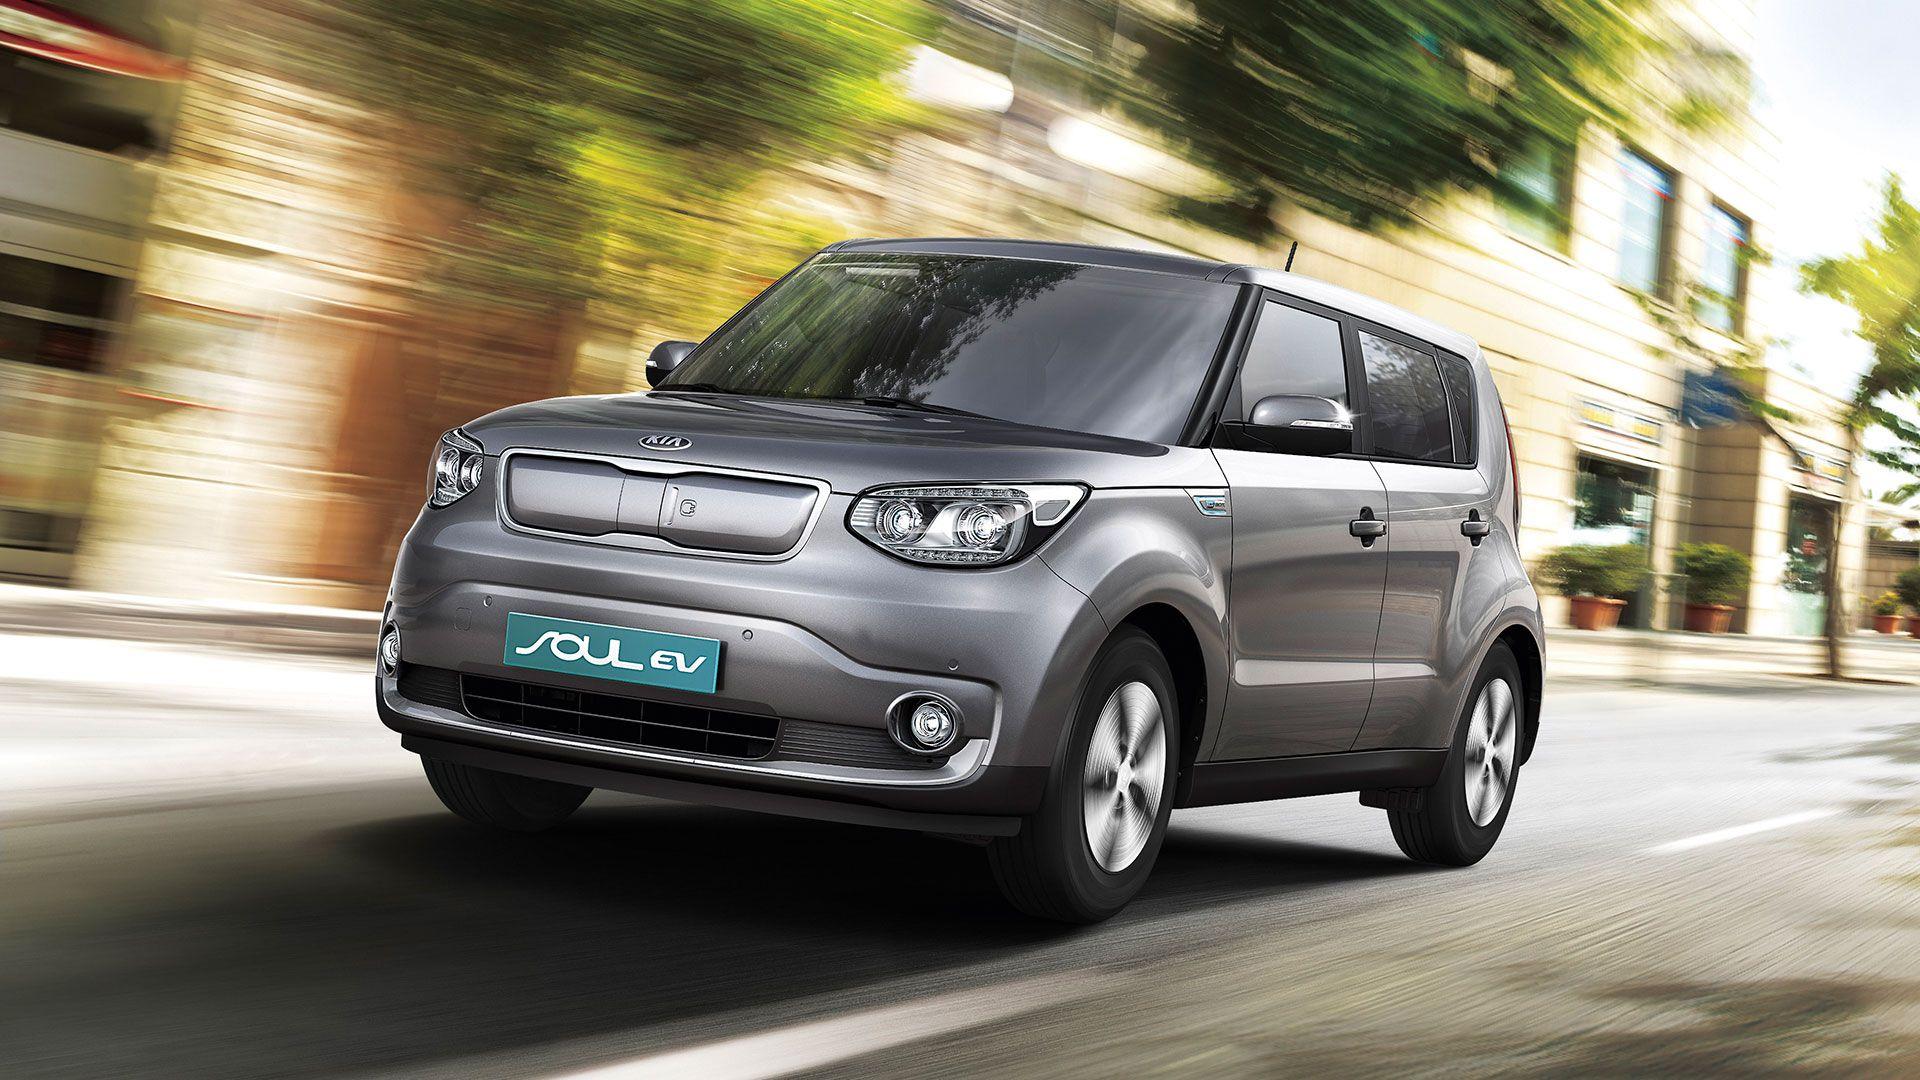 Silver Kia Soul EV electric vehicle in motion wallpaper and image